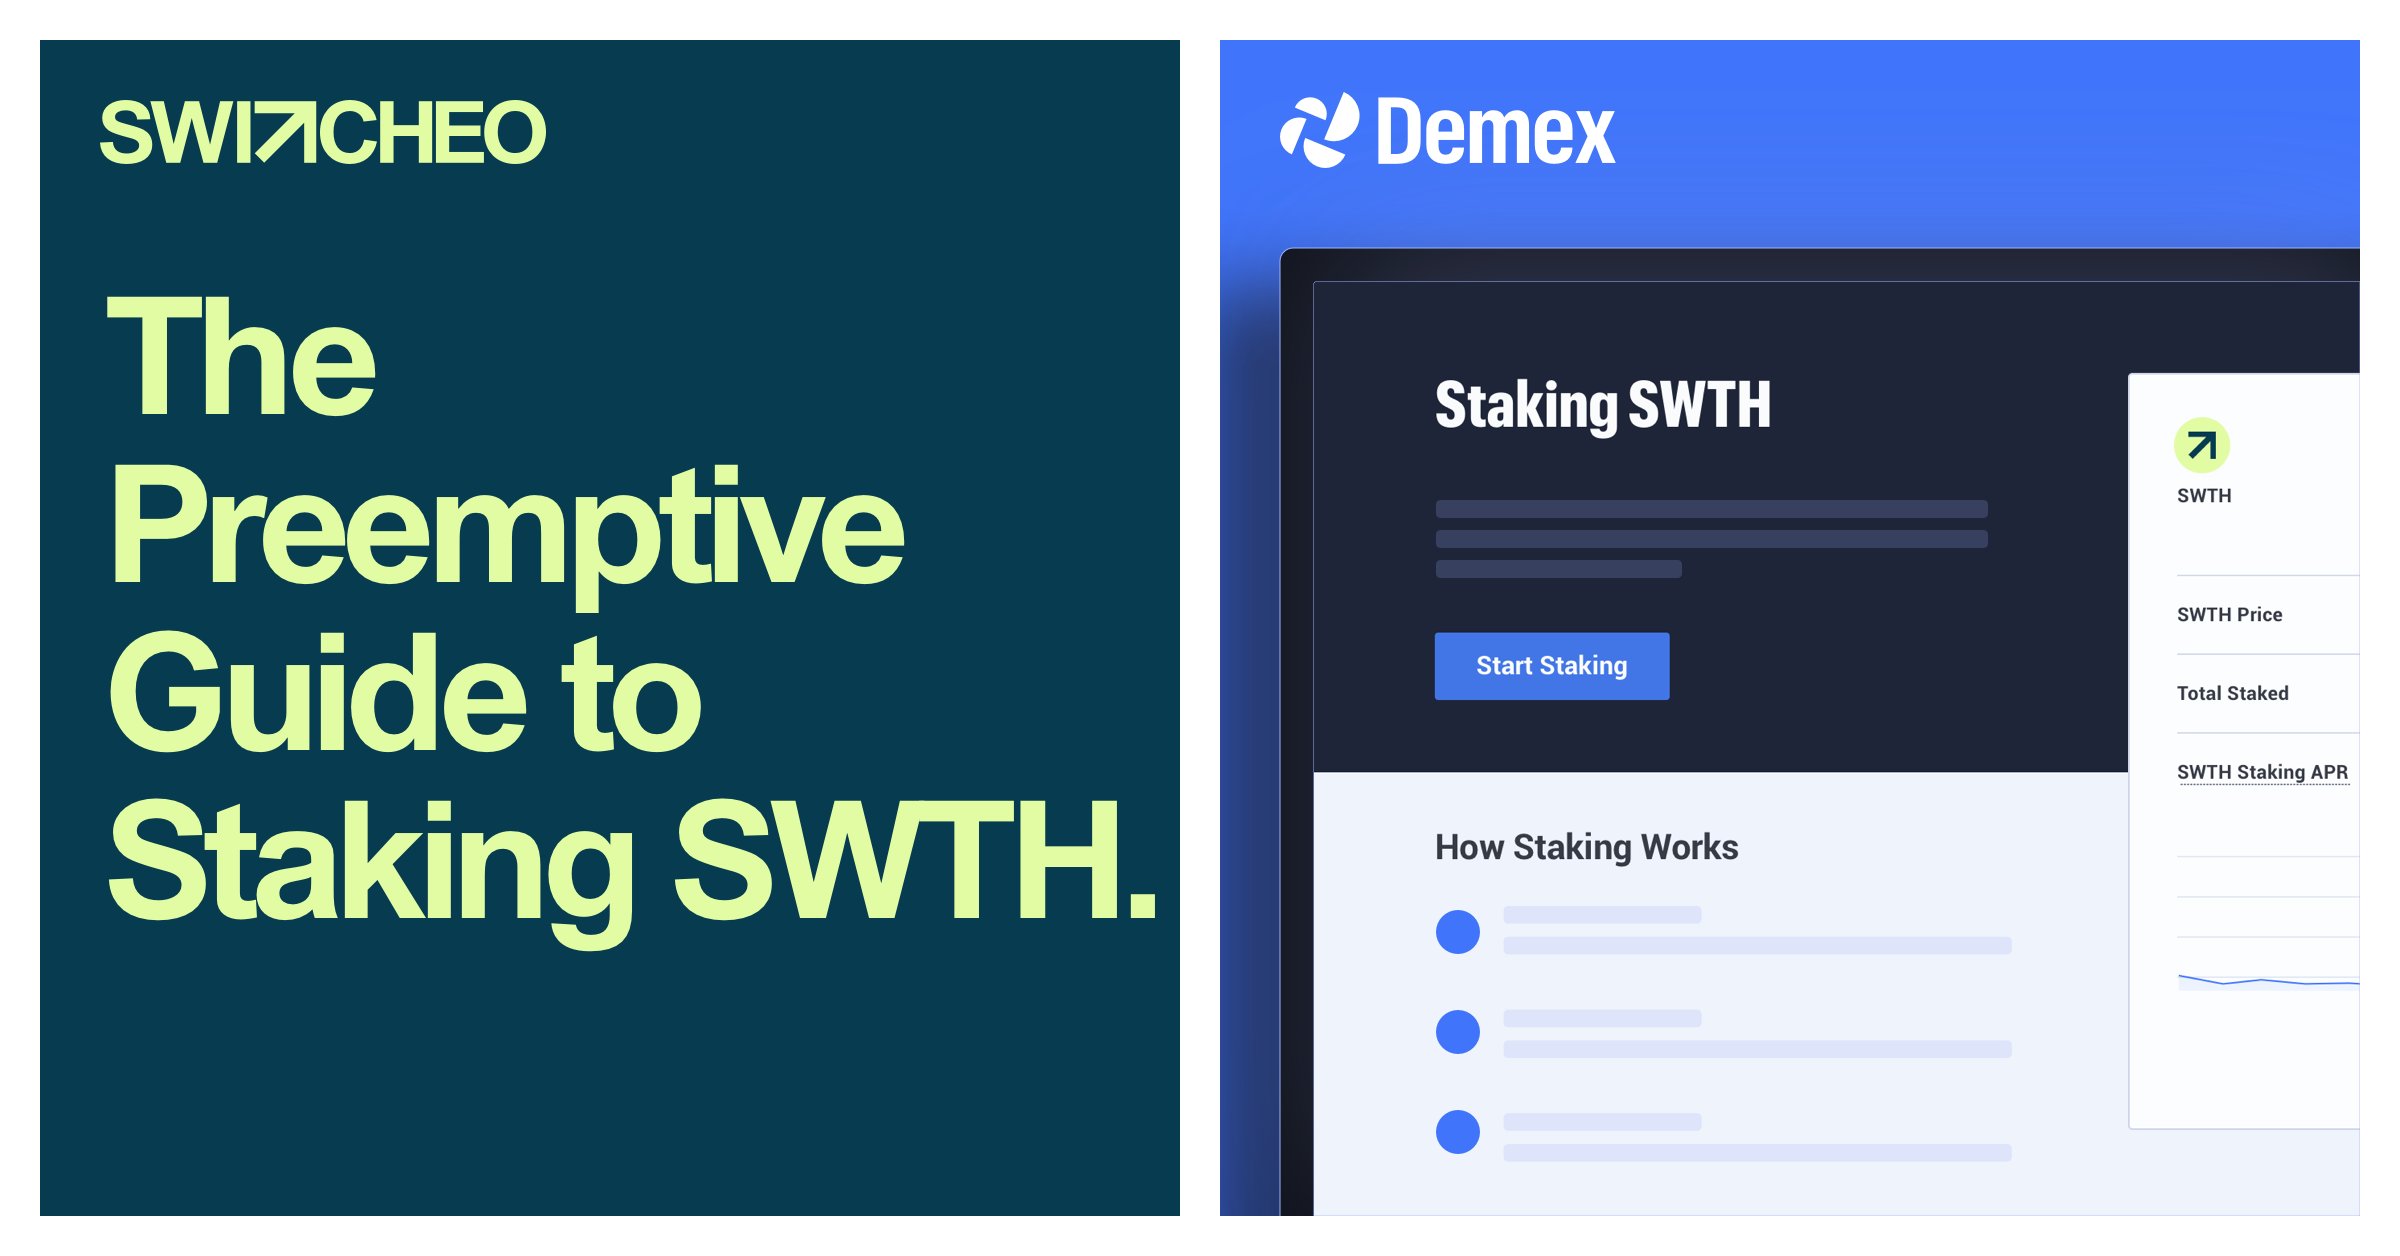 The Preemptive Guide to Staking SWTH